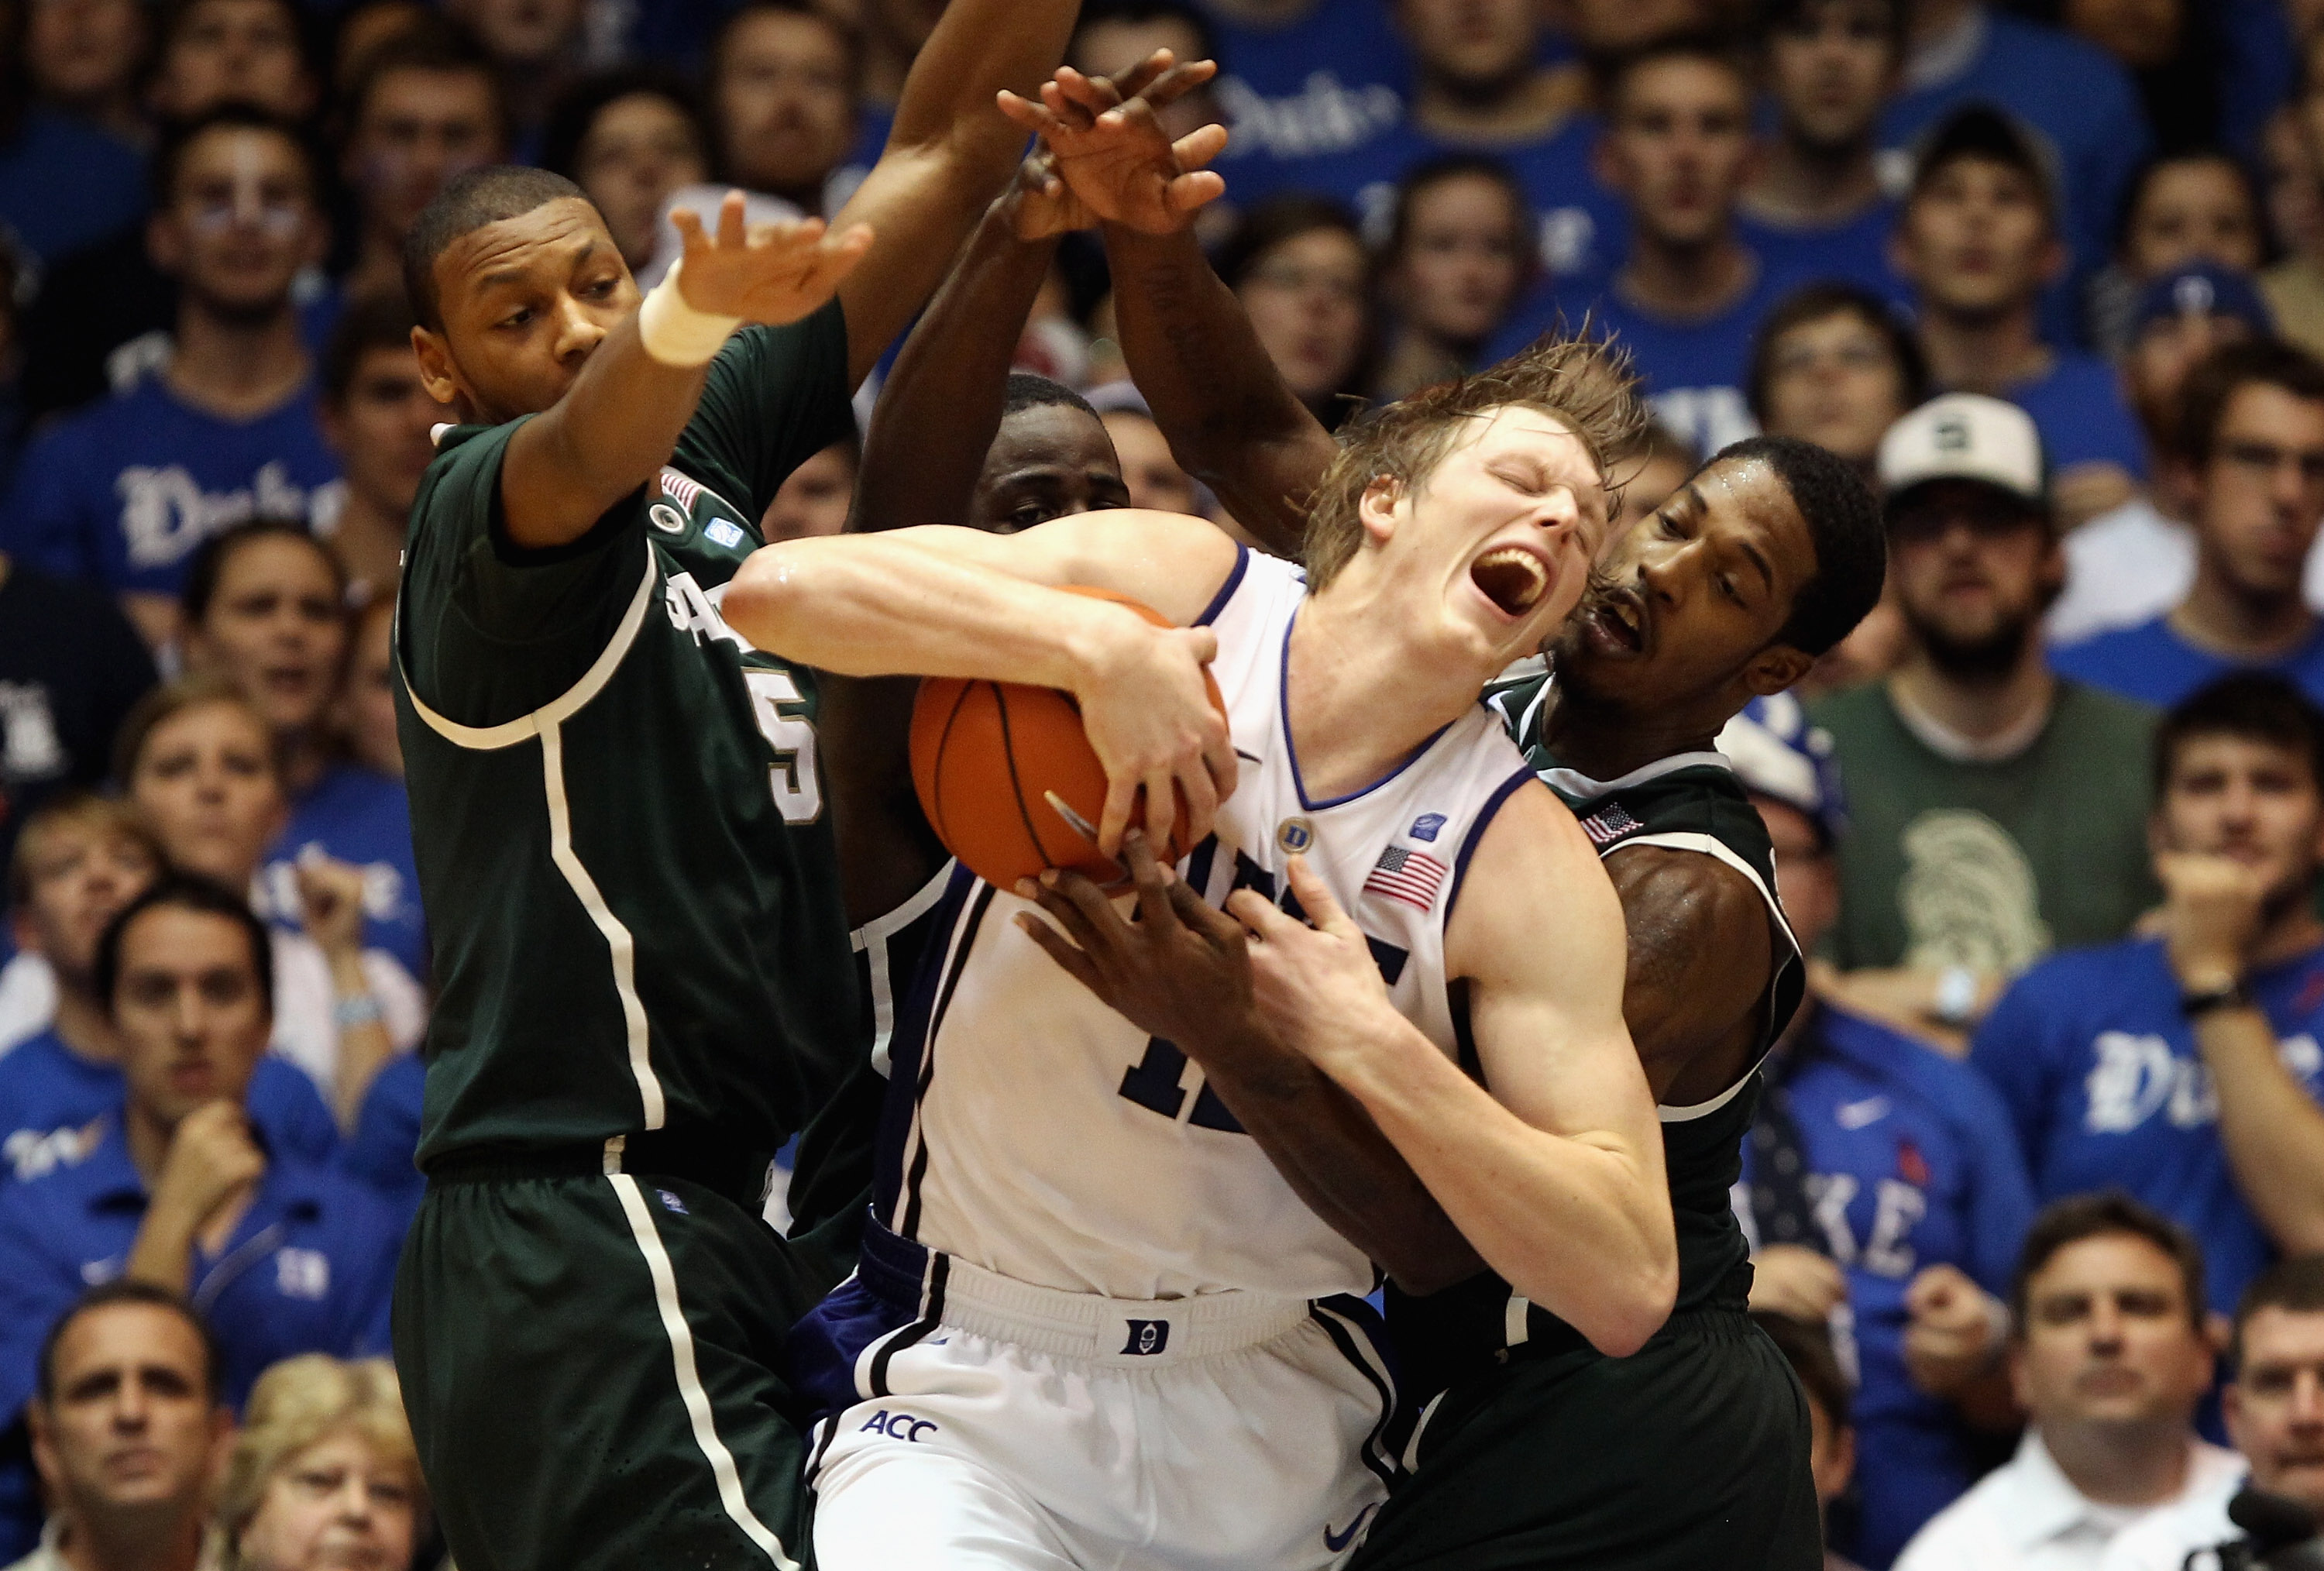 DURHAM, NC - DECEMBER 01: Teammates Adreian Payne #5 and Durrell Summers #15 of the Michigan State Spartans foul Kyle Singler #12 of the Duke Blue Devils during their game at Cameron Indoor Stadium on December 1, 2010 in Durham, North Carolina. (Photo by